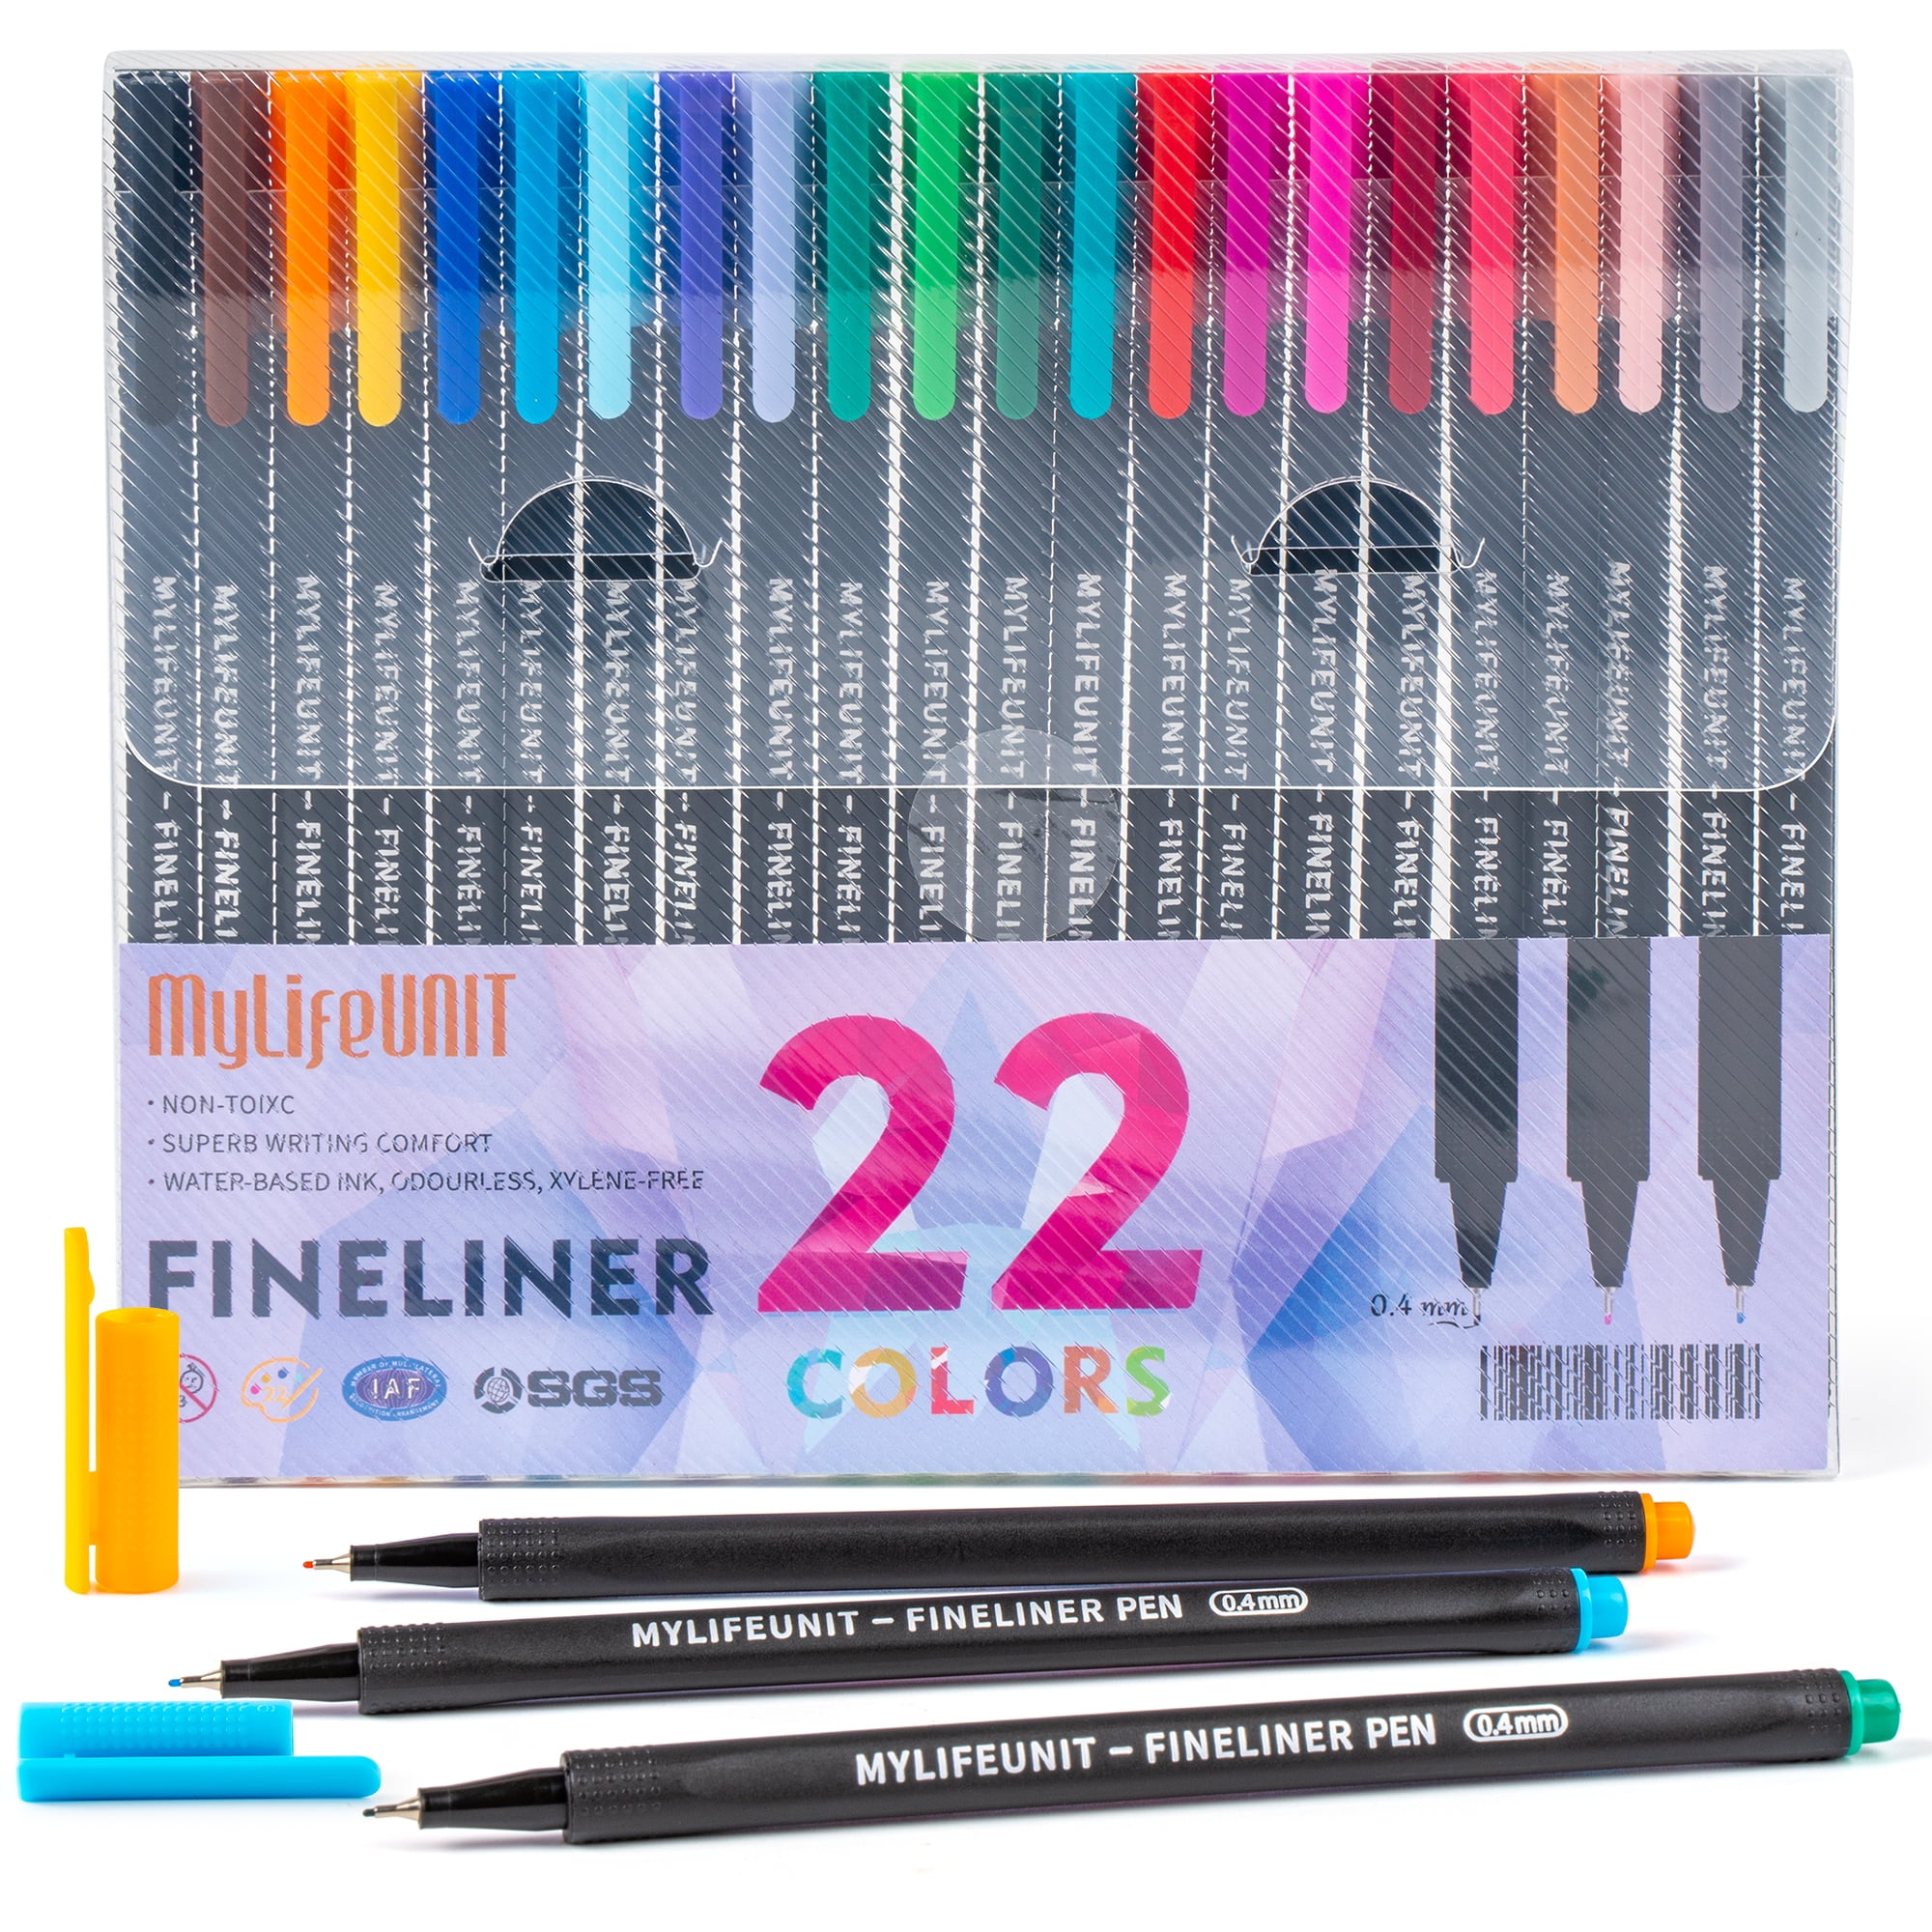 YISAN Journal Pens,24 Colored Fineliner Pens Set,Bullet Journaling Fine Tip  Markers for Drawing,Note Taking,No Bleed,Art Projects Supplies,70023 